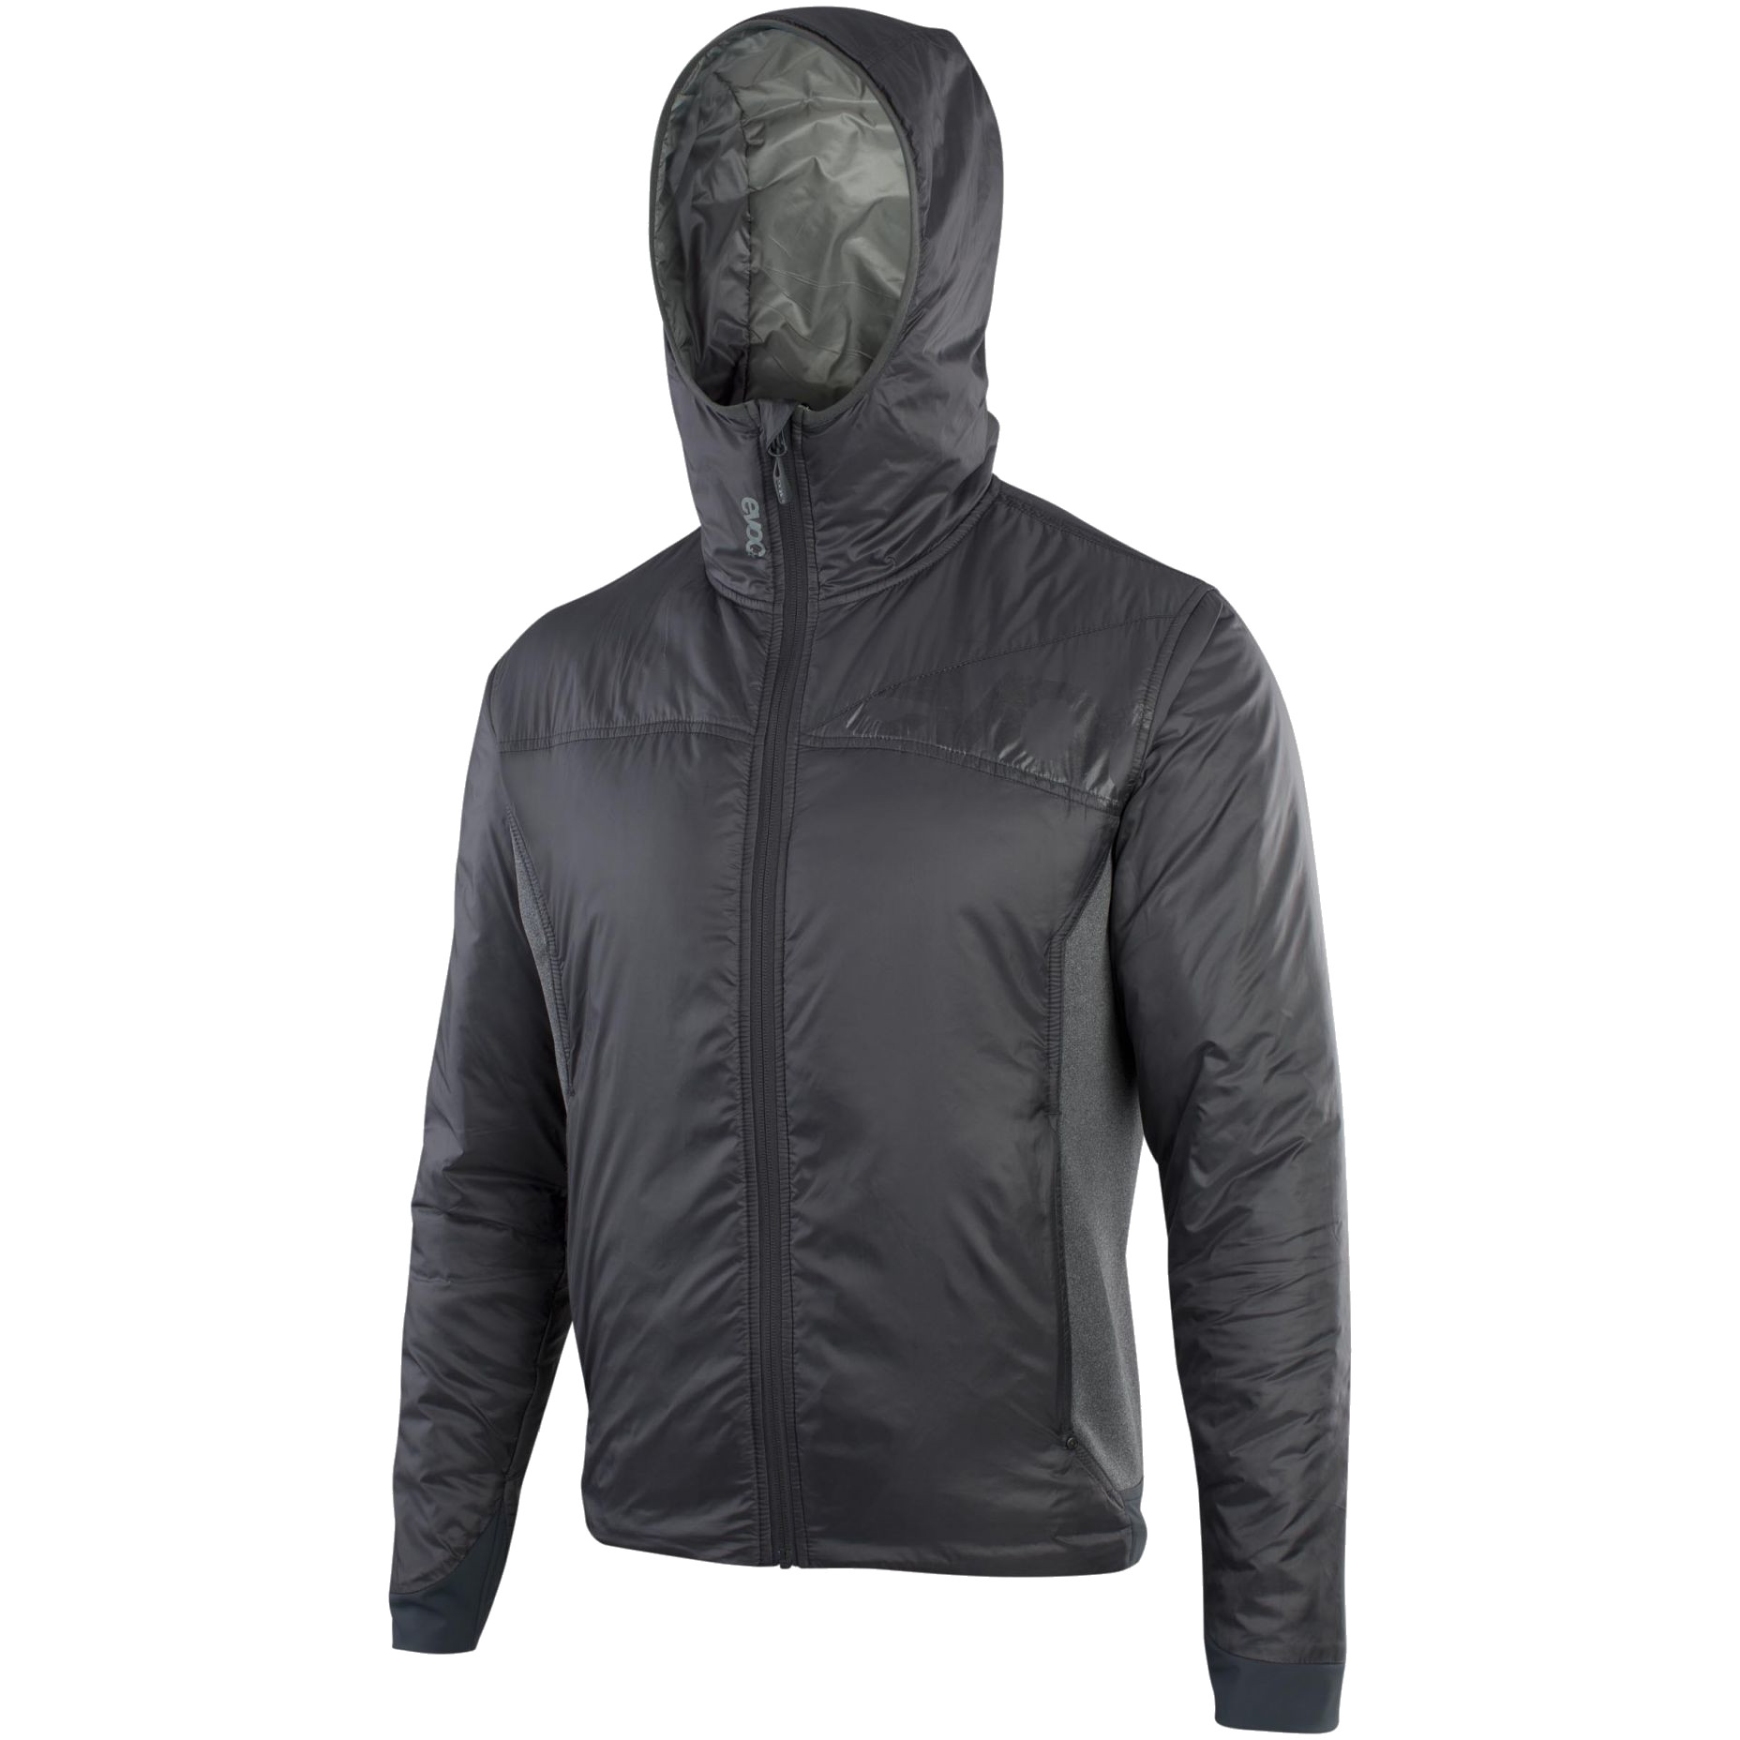 Image of EVOC Insulated Jacket - Carbon Grey